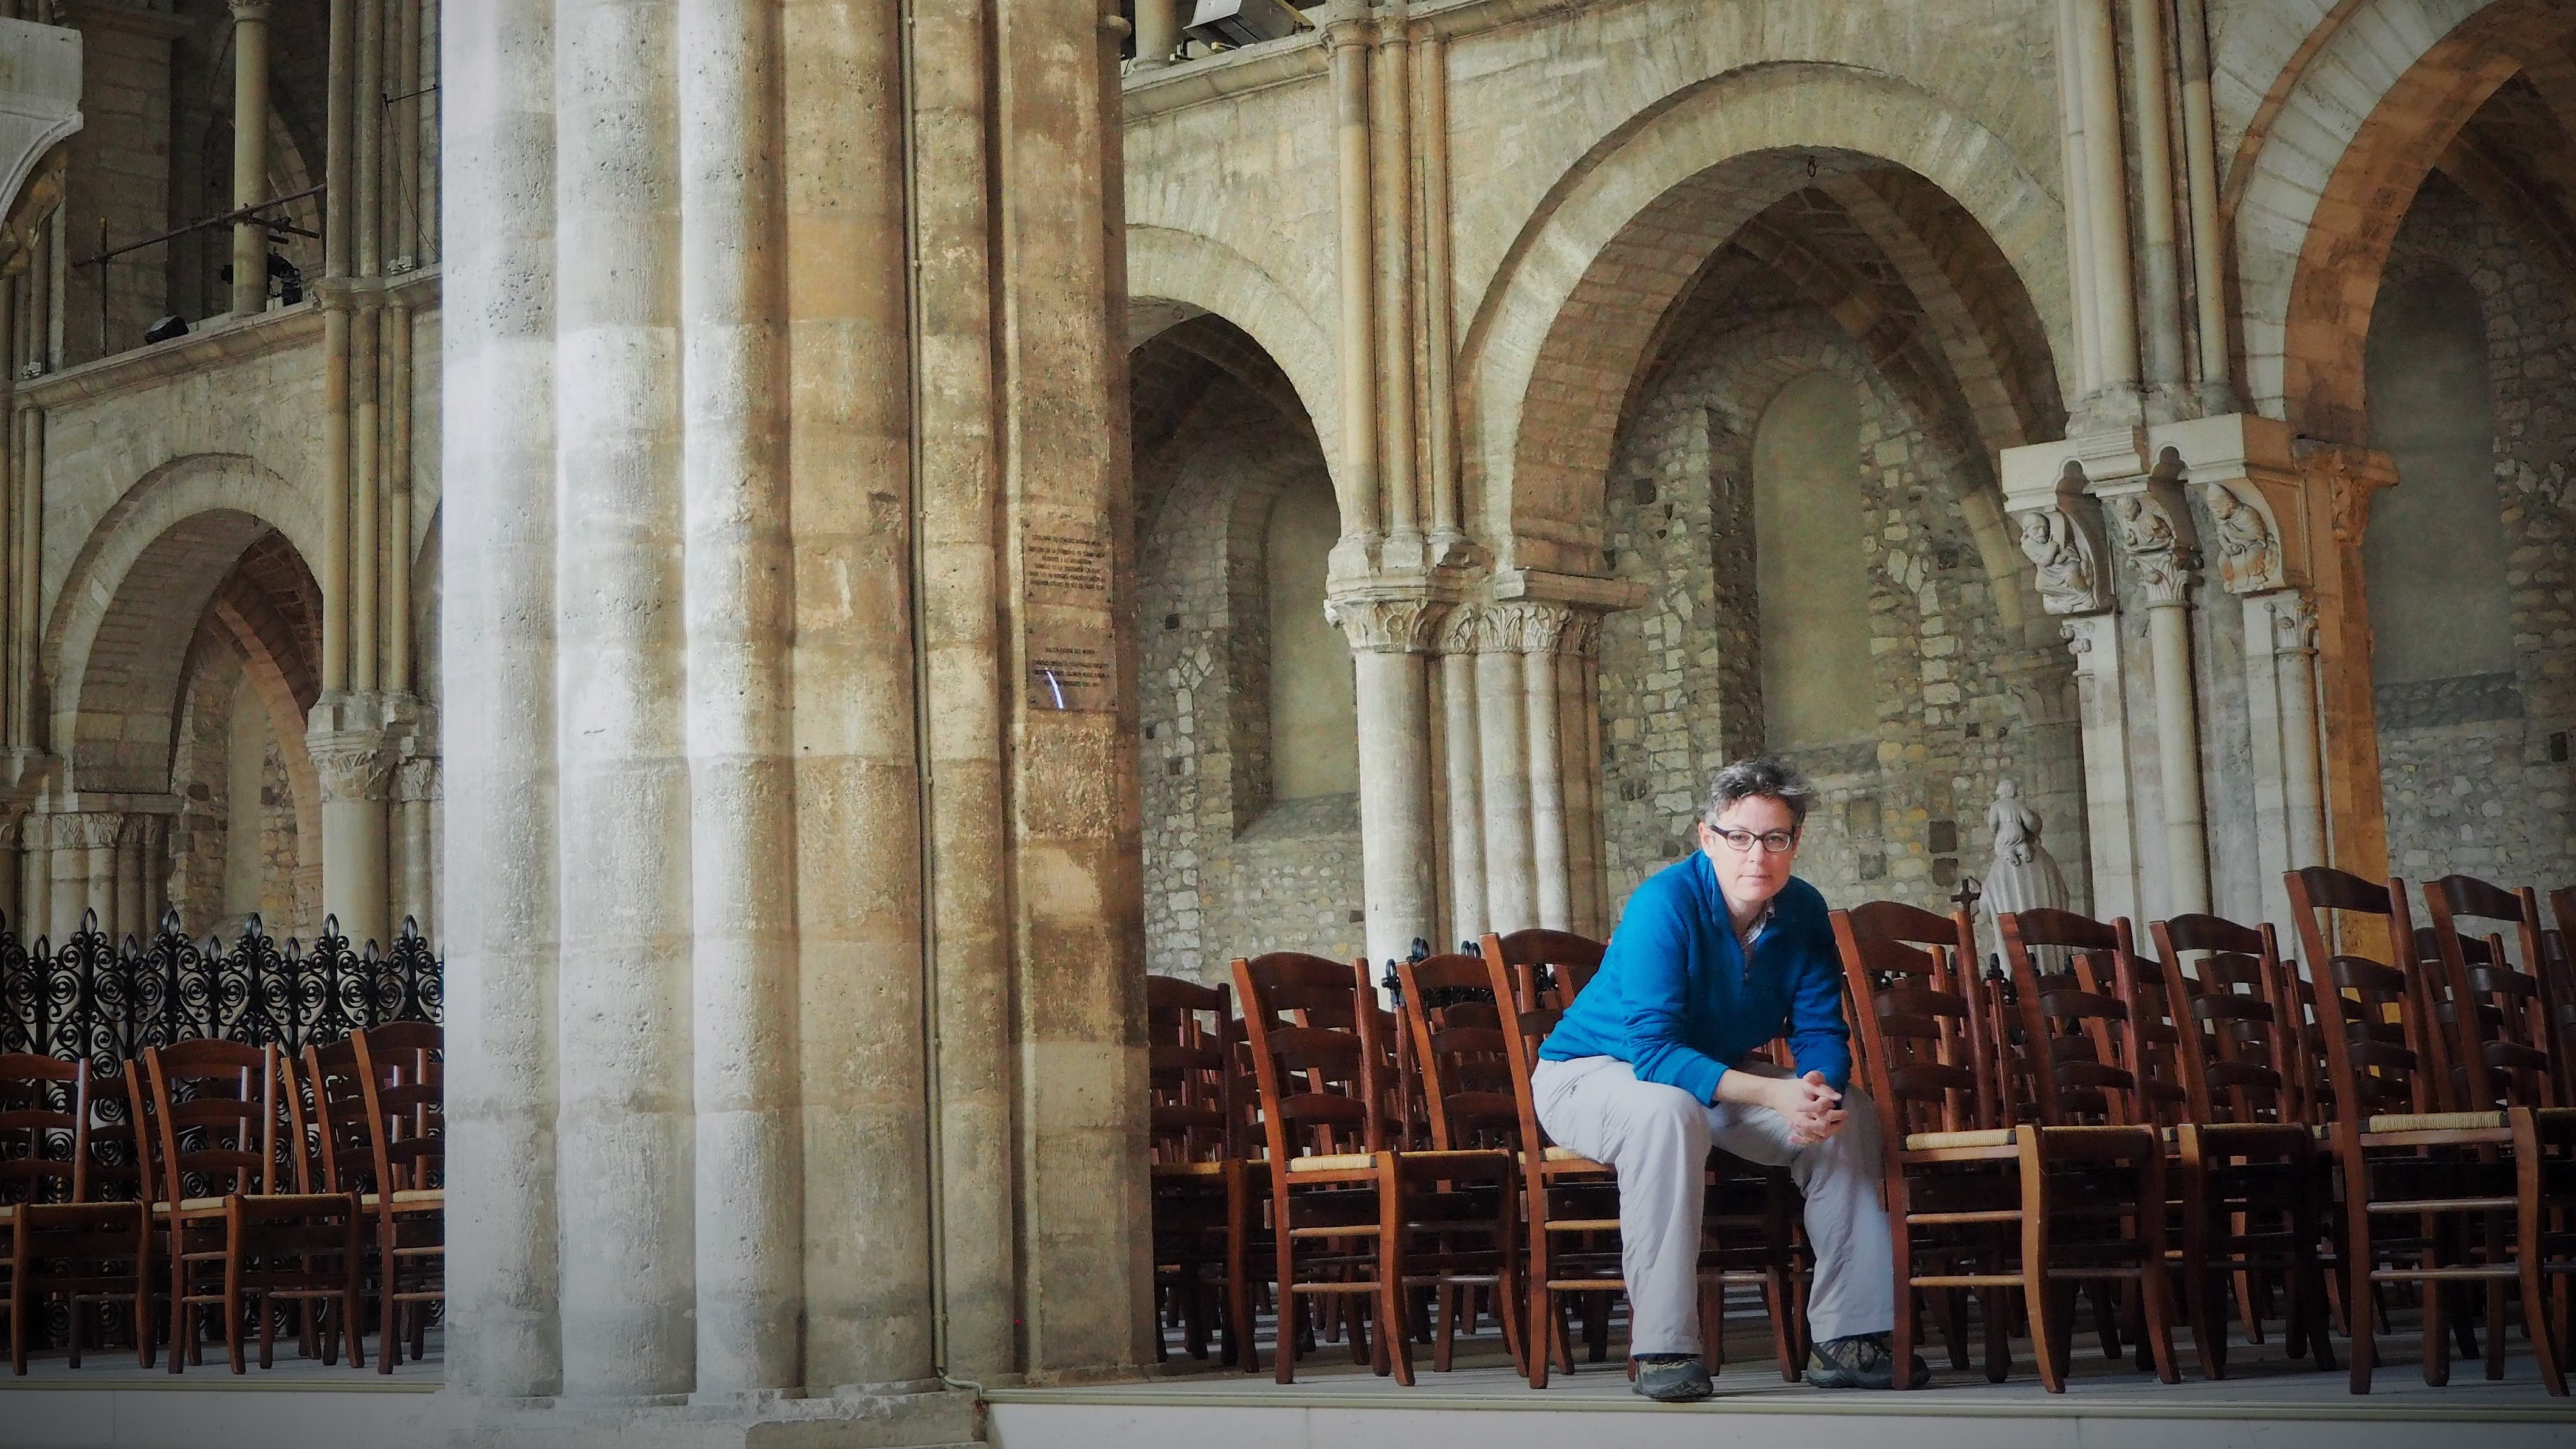 Riding in France: Two days of problem-solving in Reims